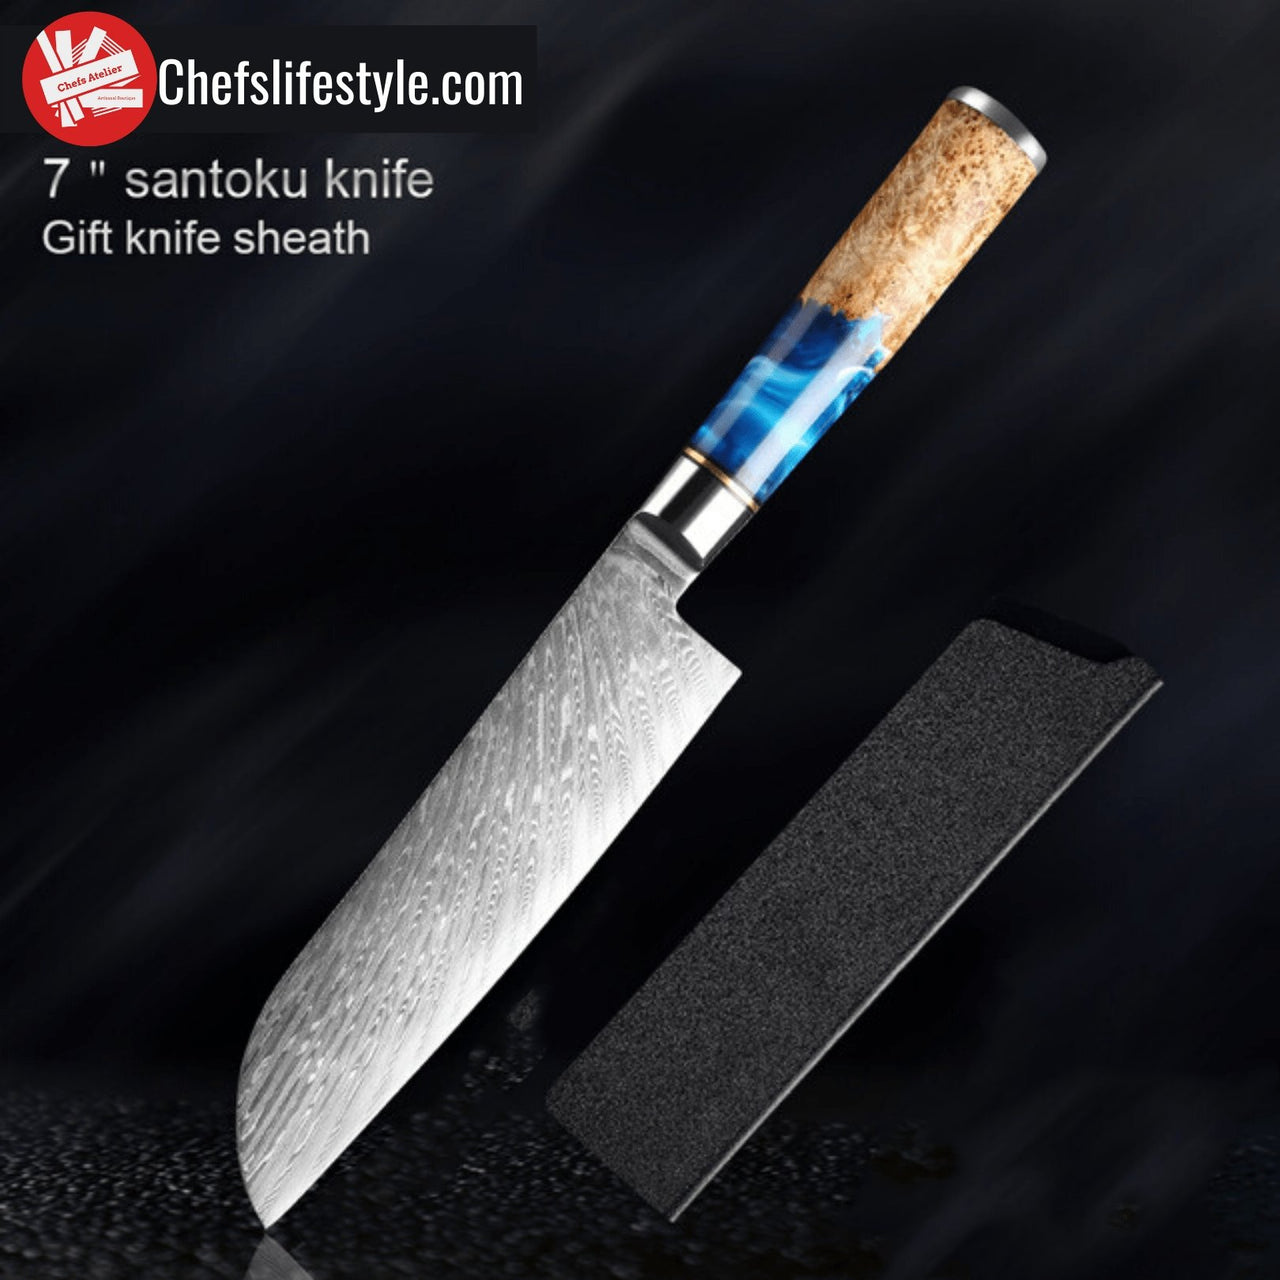 chefslifestyle chef lifestyle Chefs Atelier by Unicommerce Pte. Ltd. Kiyomi Series Knife 7 inch santoku knife damascus knives chef knife chef atelier best knife japanese review top lightweight balanced hand made kiritsuke serbian butcher knife hand forged best top quality free shipping high carbon steel